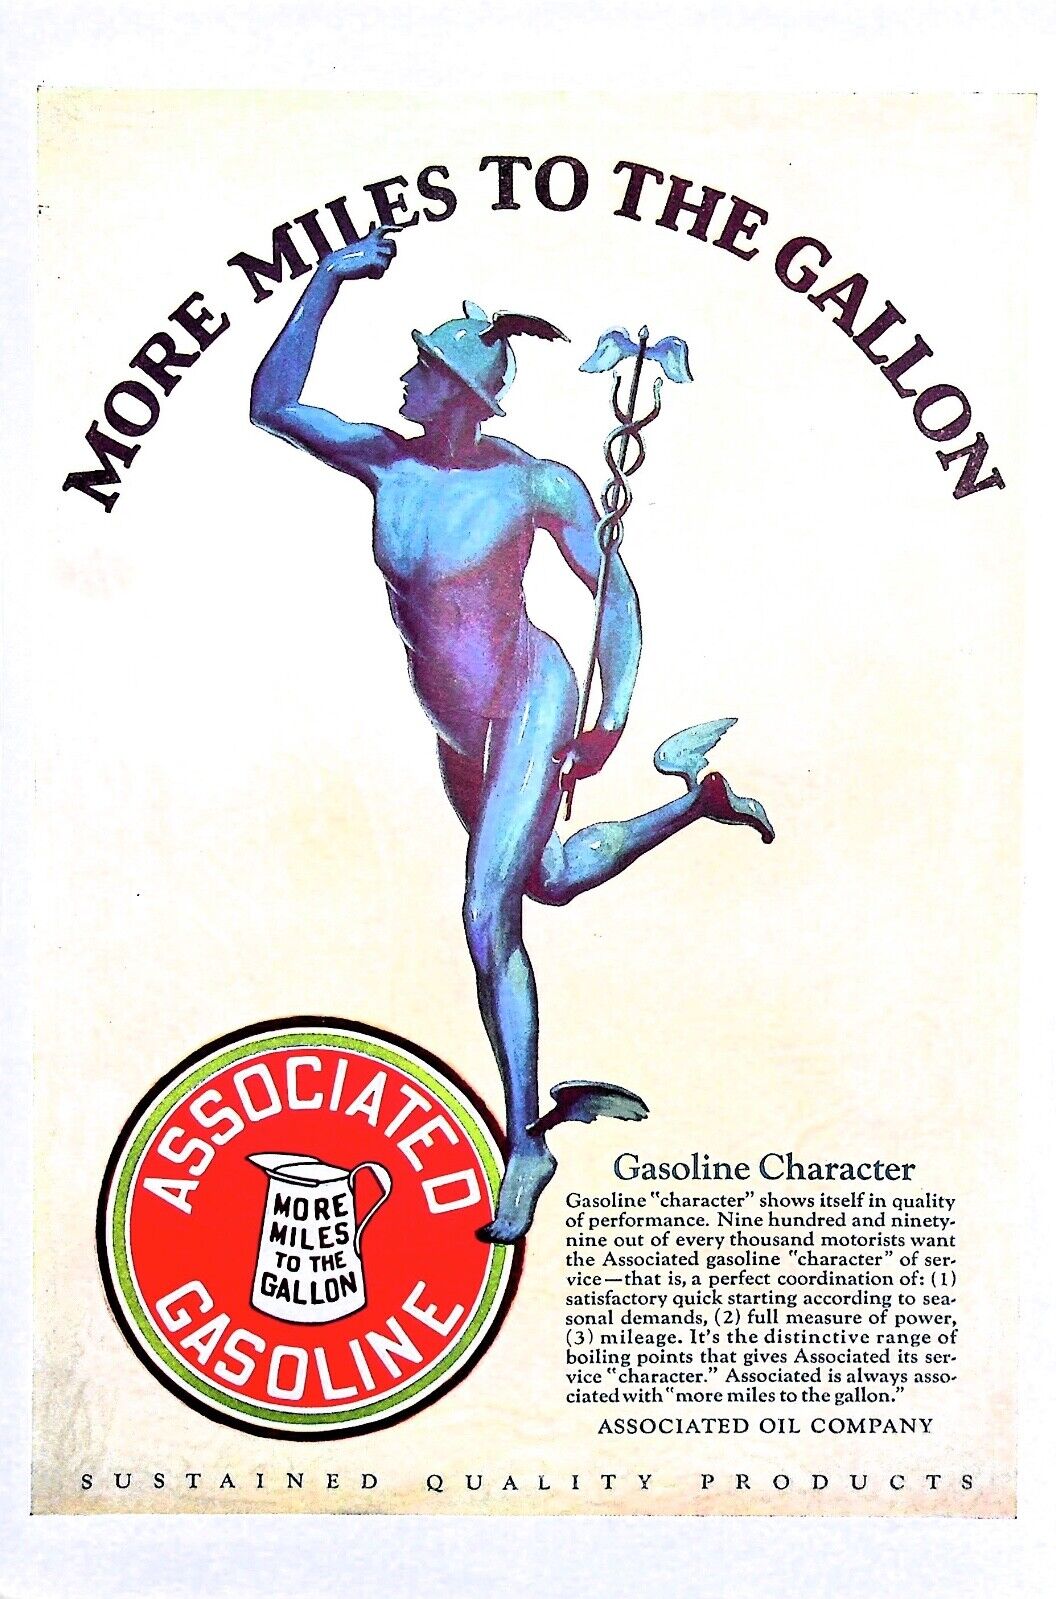 Original Vintage Associated Gasoline Ad: More Miles to the Gallon